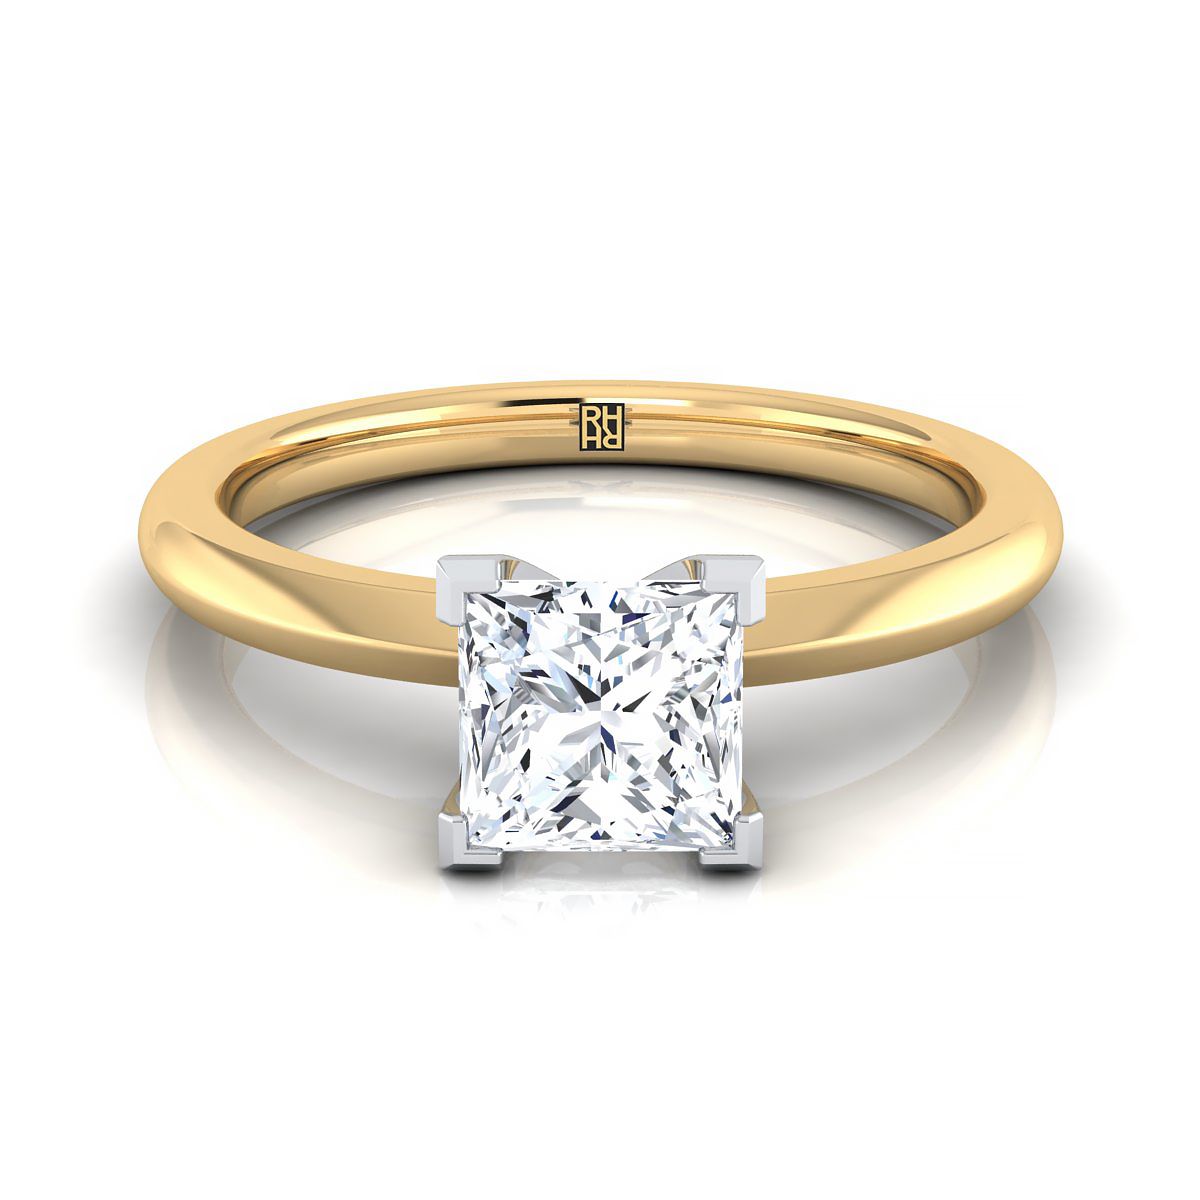 18K Yellow Gold Princess Cut  Petite Knife Edge Solitaire Engagement Ring